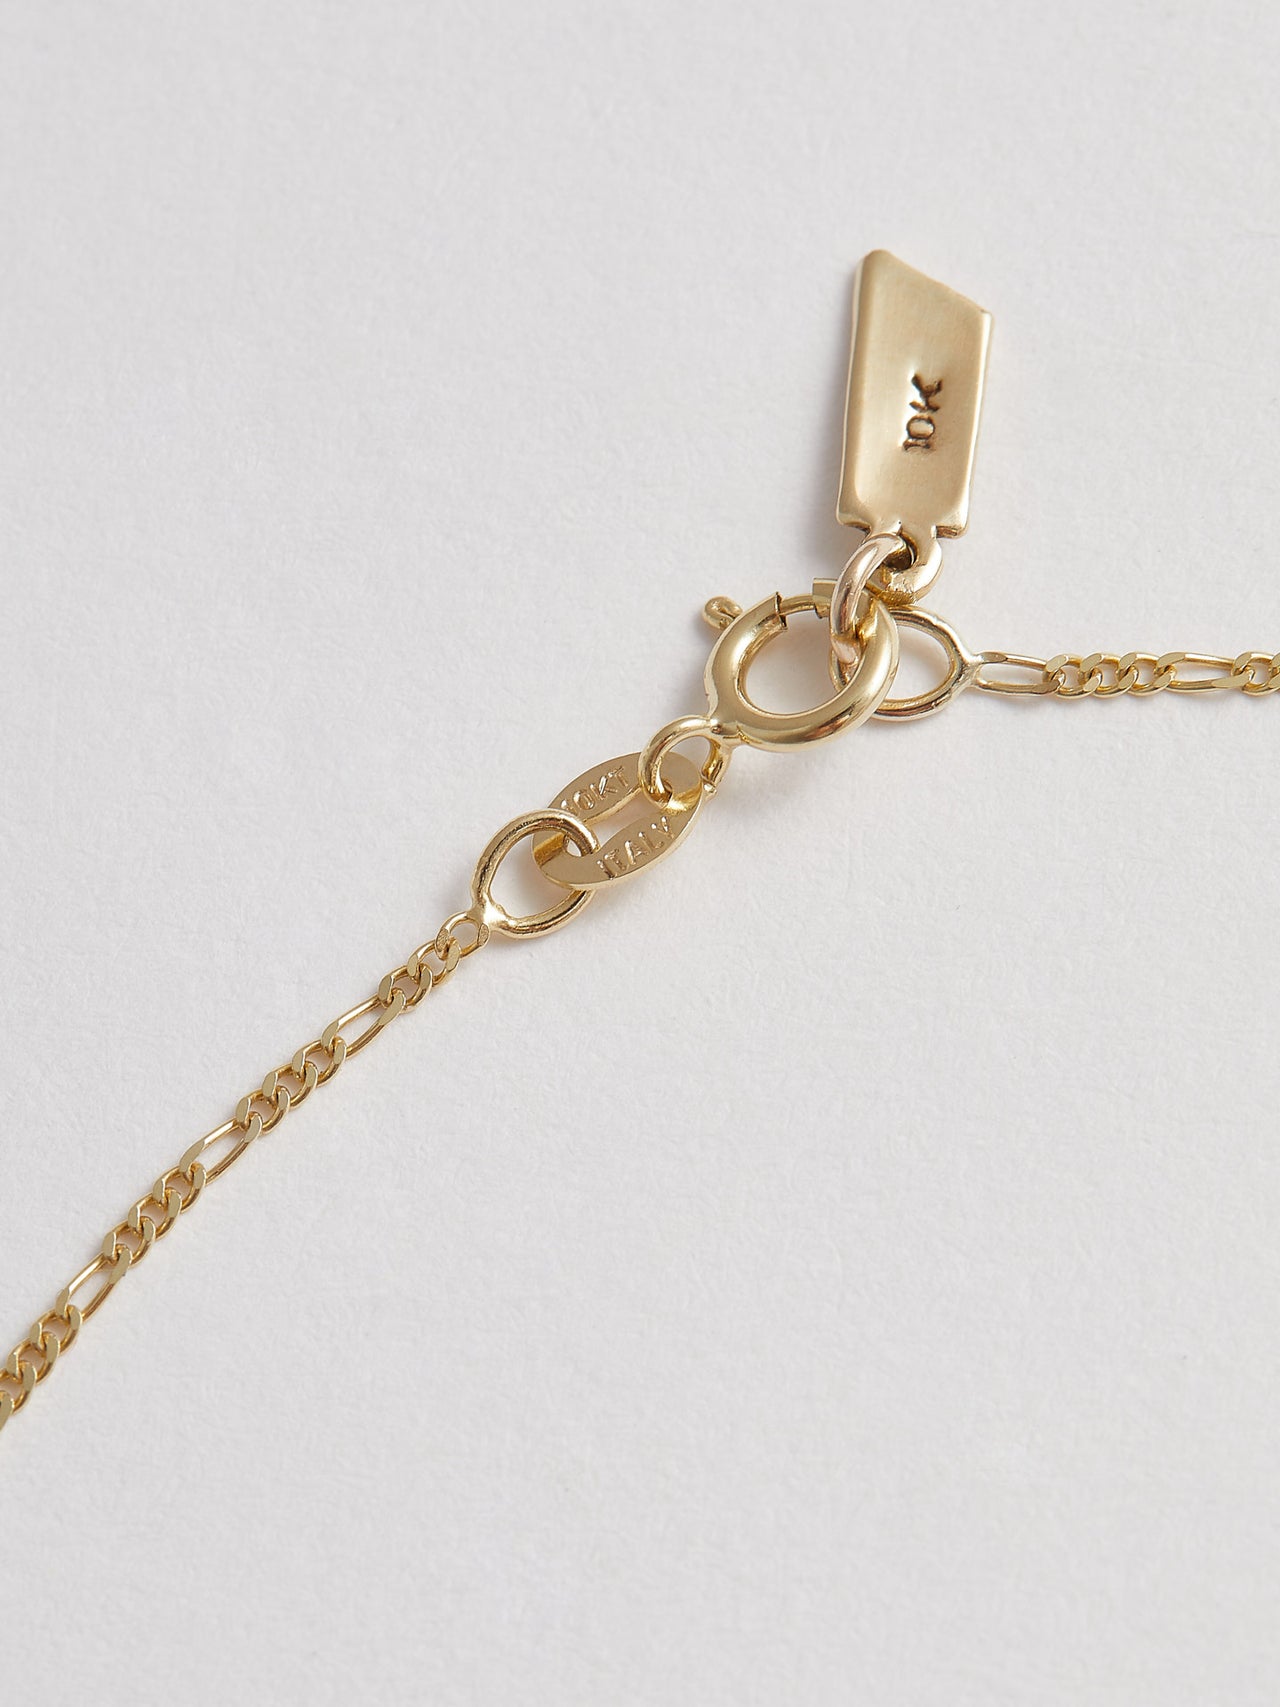 Baby Fig Chain Bracelet:10Kt Yellow Gold Figaro Chain Width: 1.3mm Length: 7"